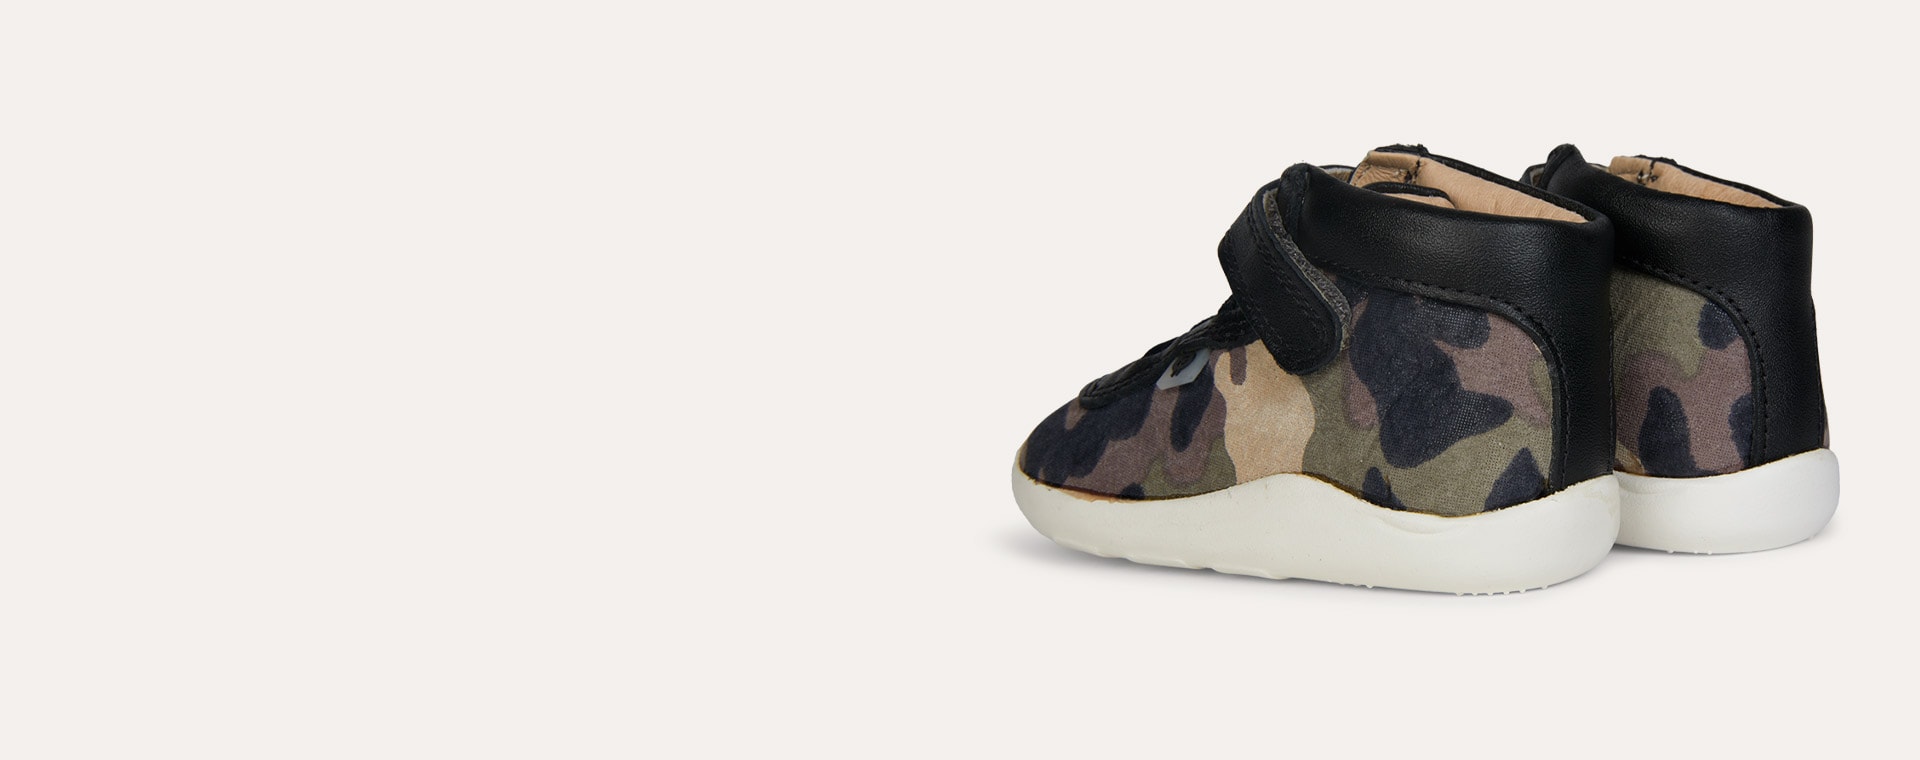 Army Camo/Black old soles Causeway Ground Trainer